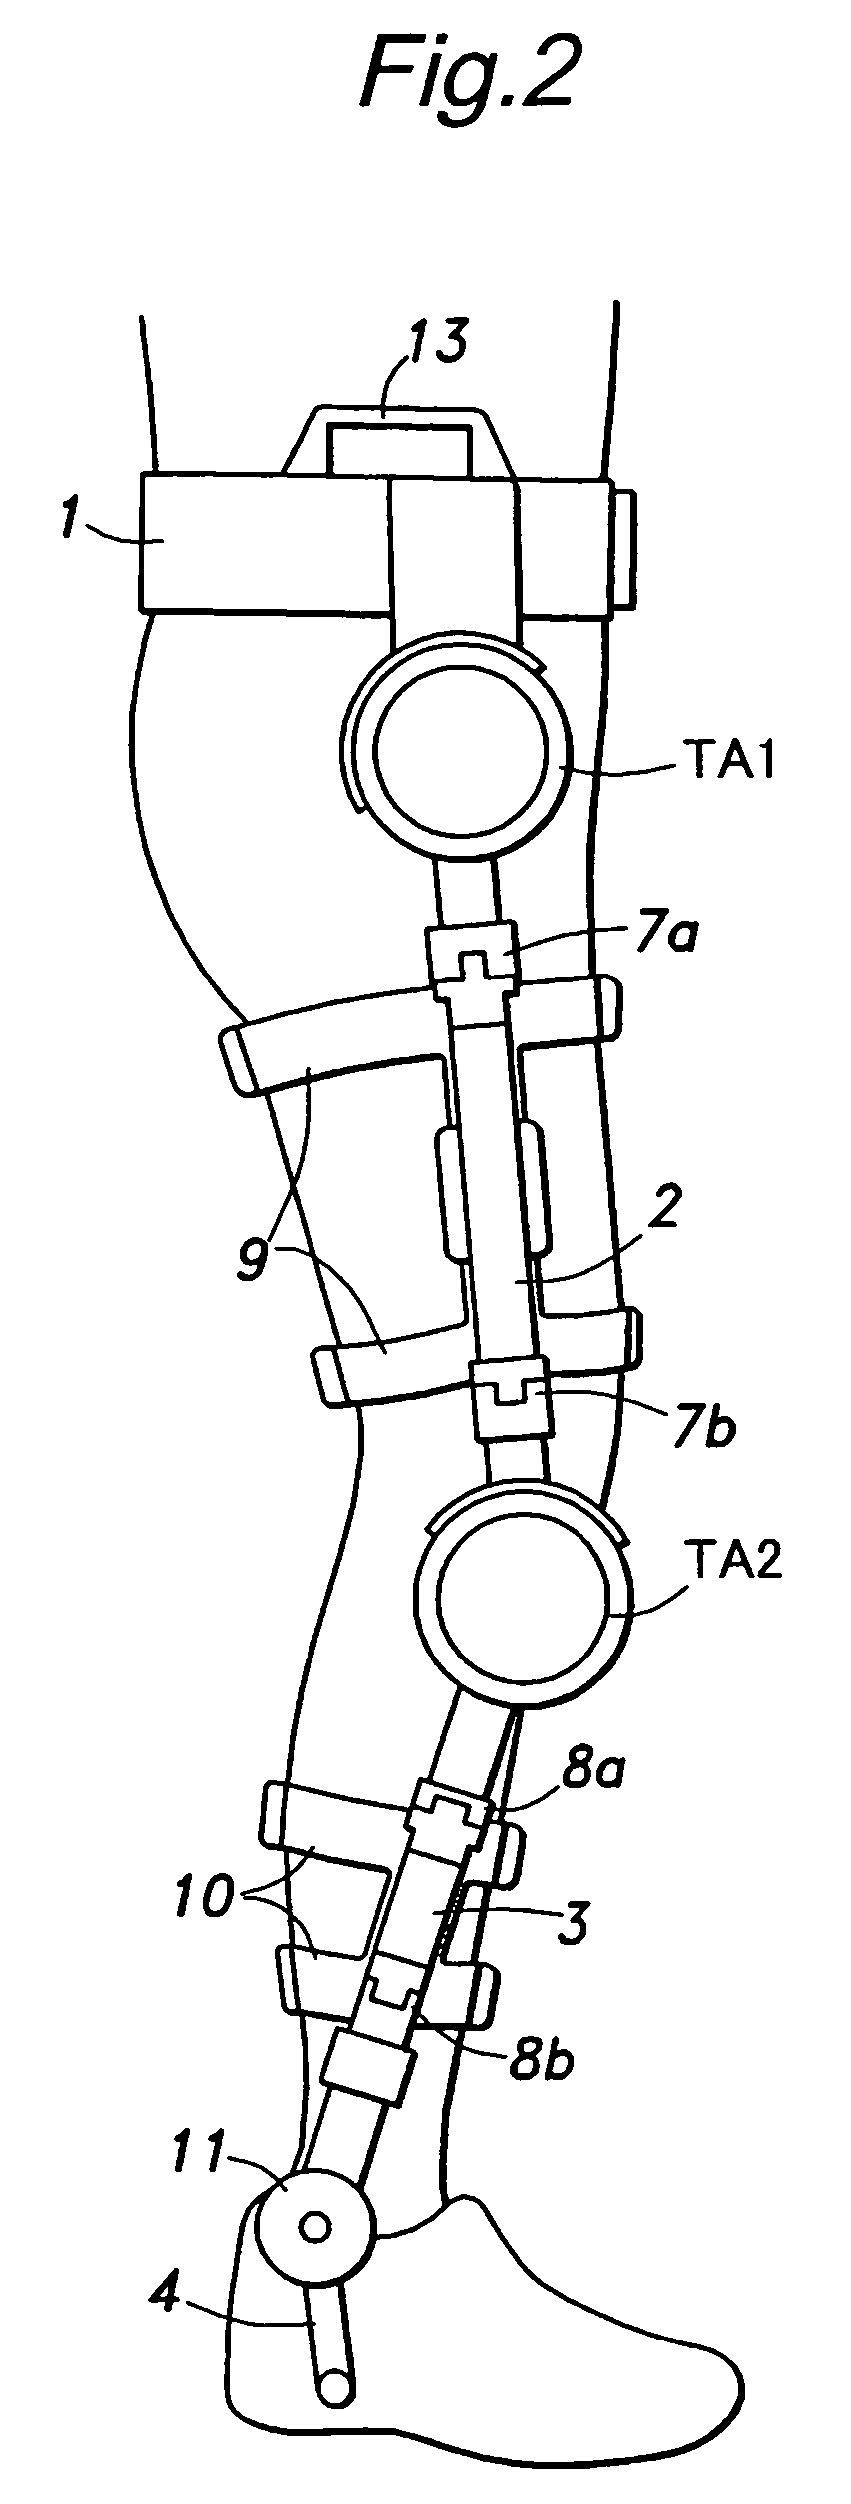 Walking assistance device having a pelvis support member that is easy to wear